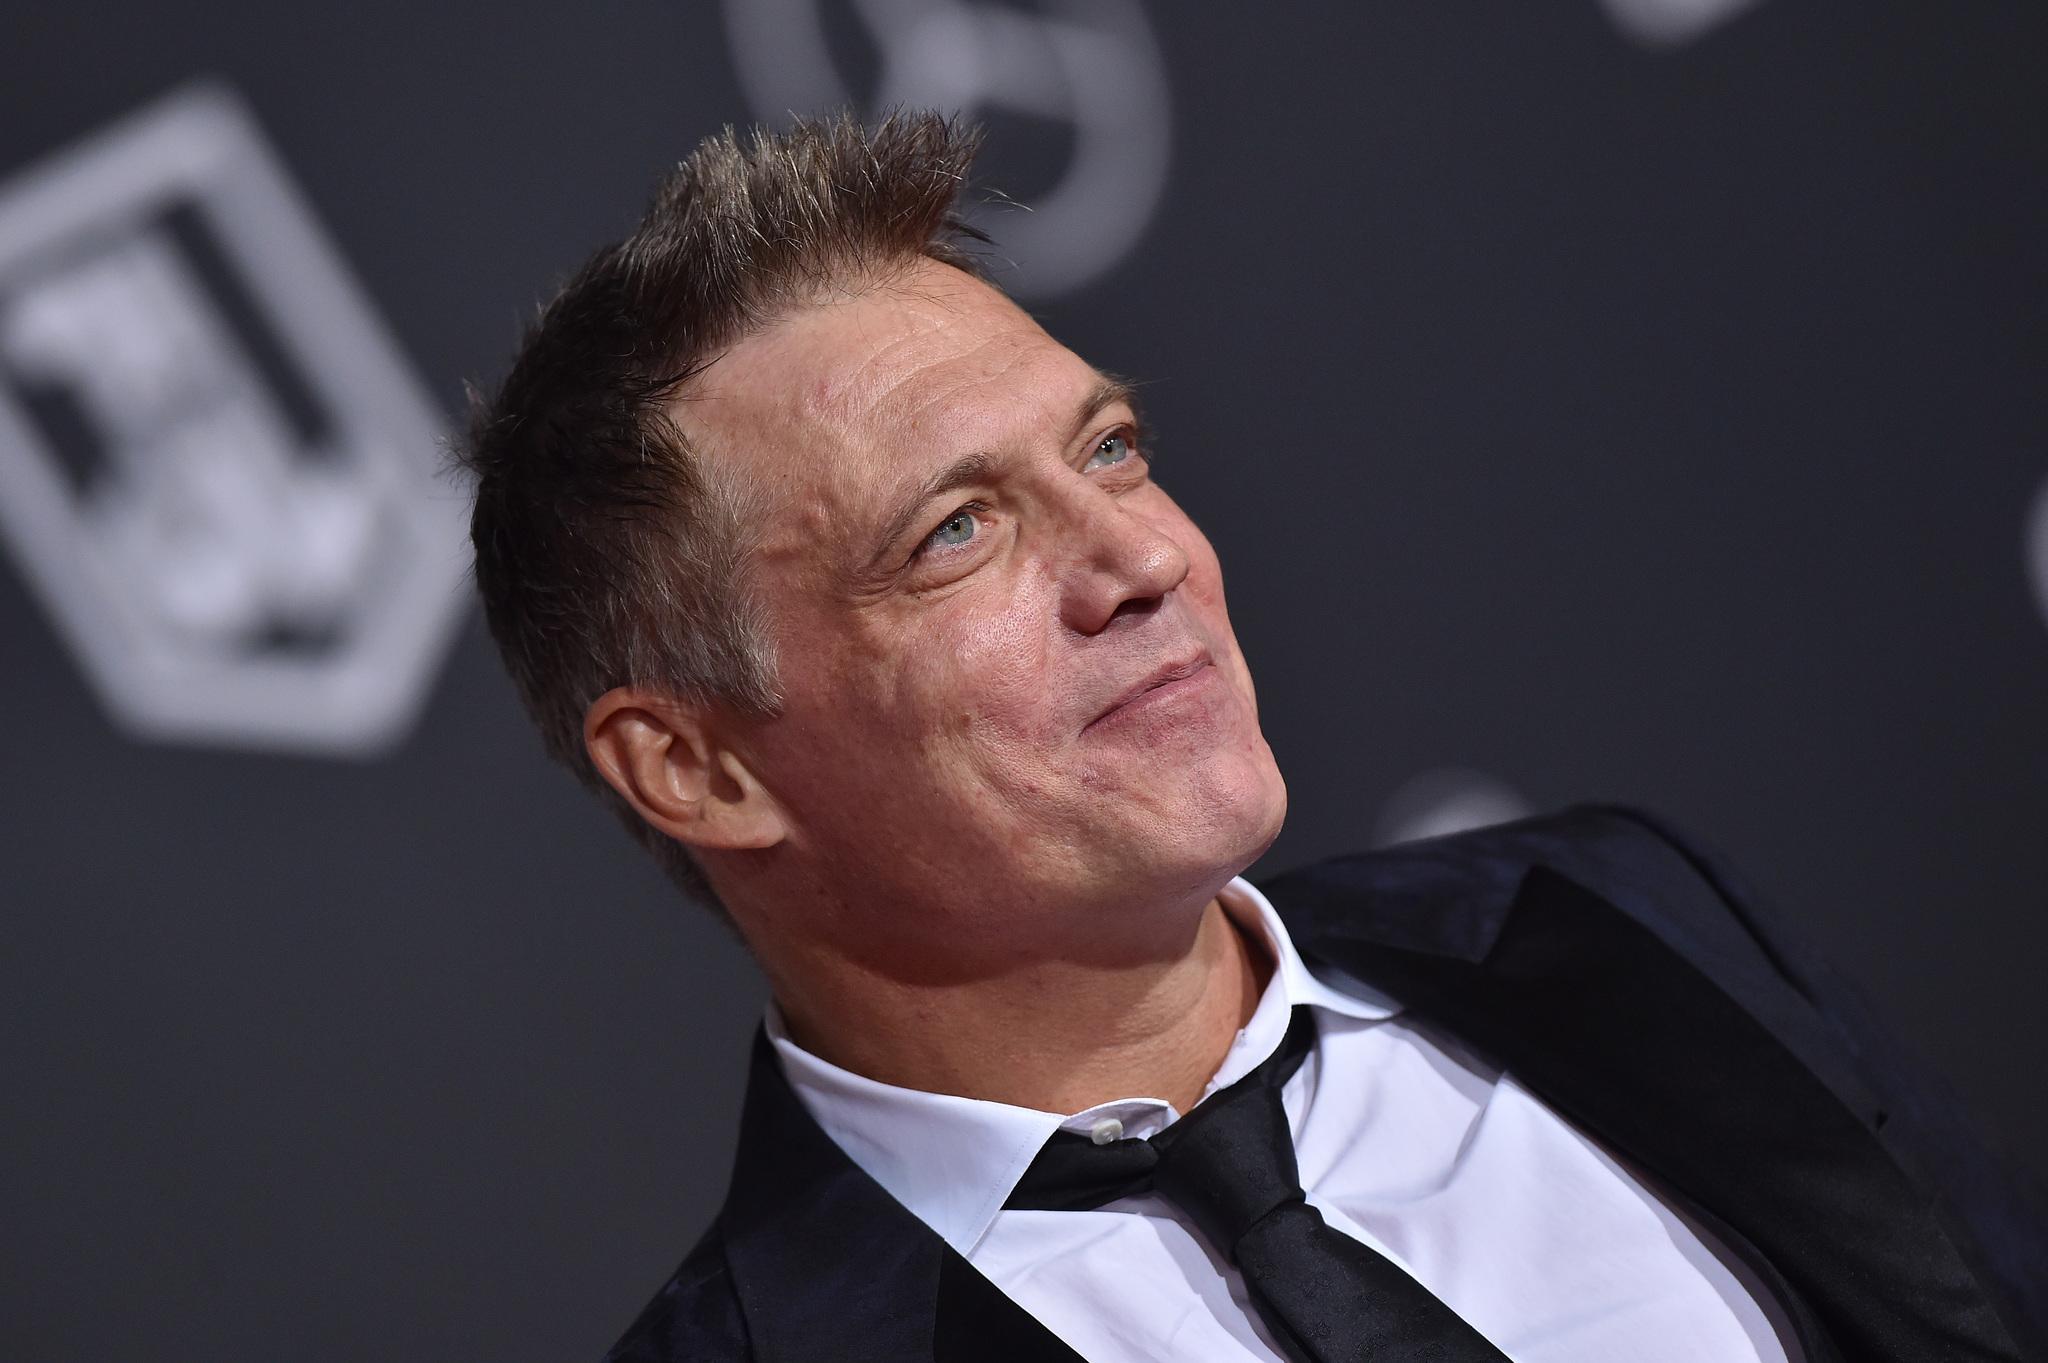 Holt McCallany image